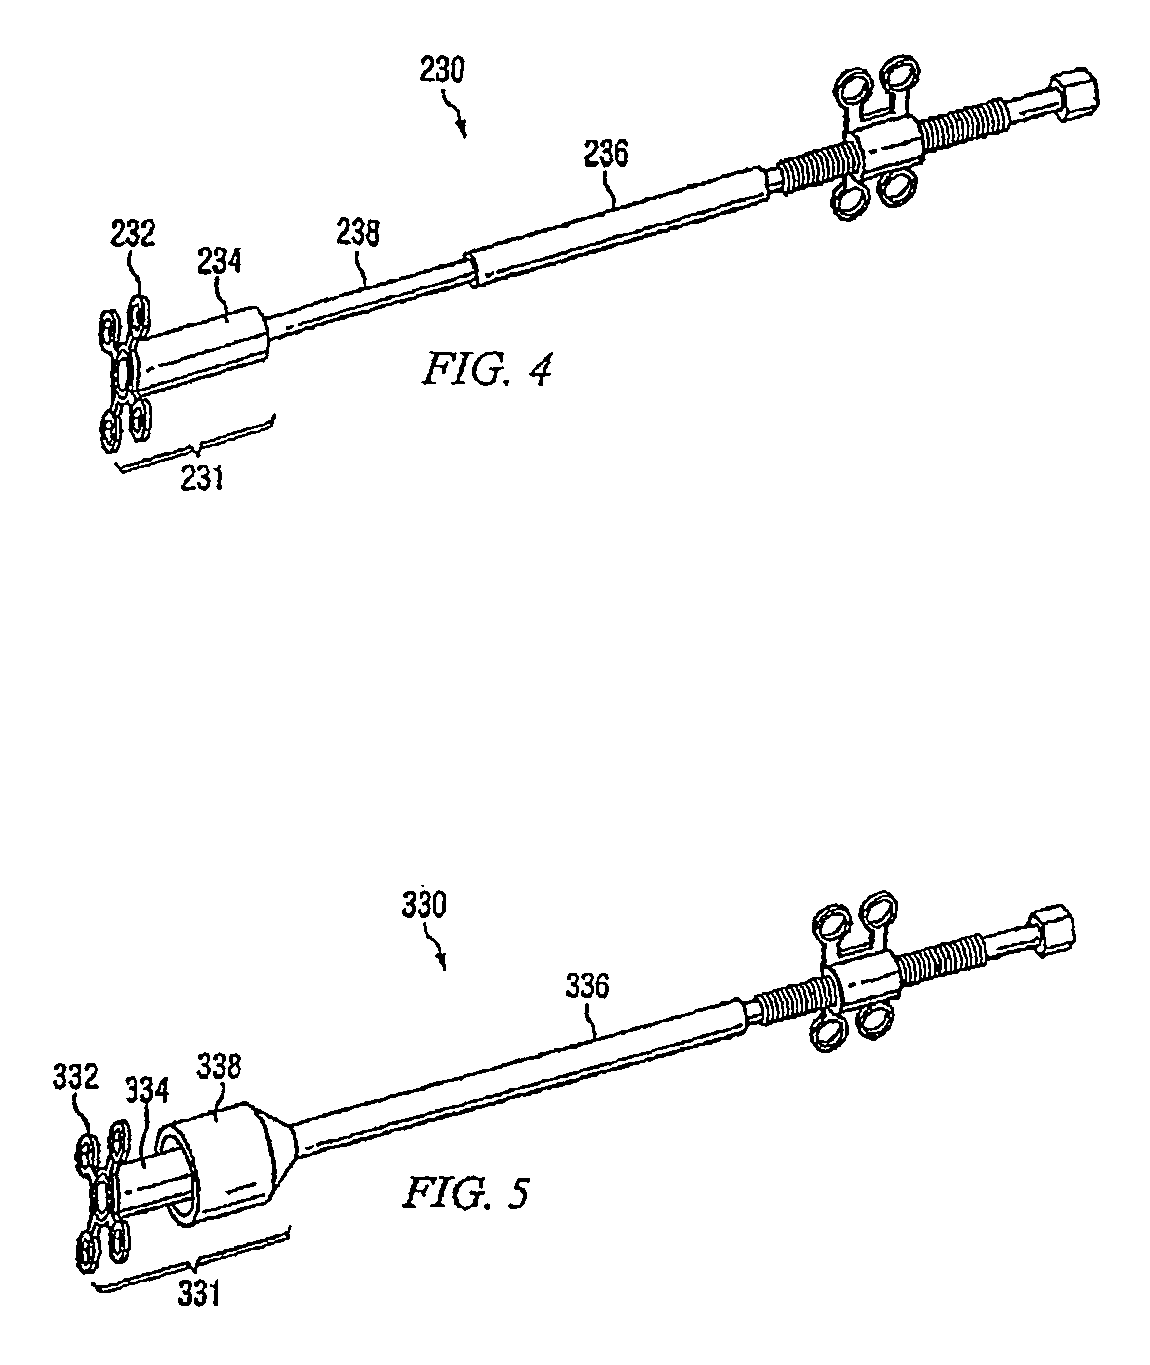 Method and system for facial osteodistraction using a cannulated device